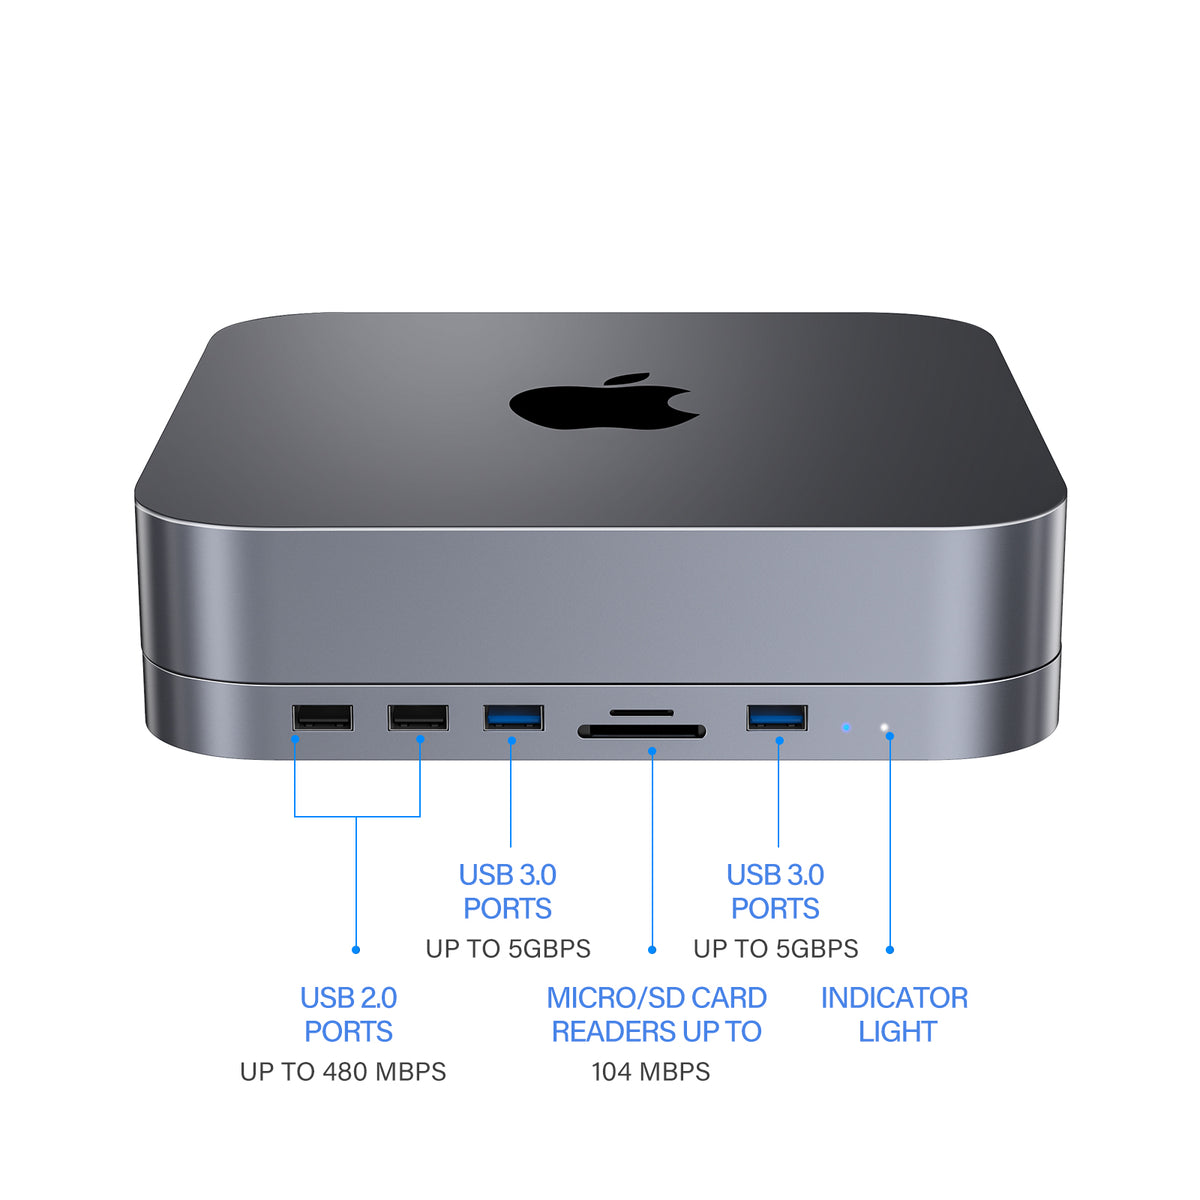 The Satechi Stand & Hub for Mac offers speeds and additional storage